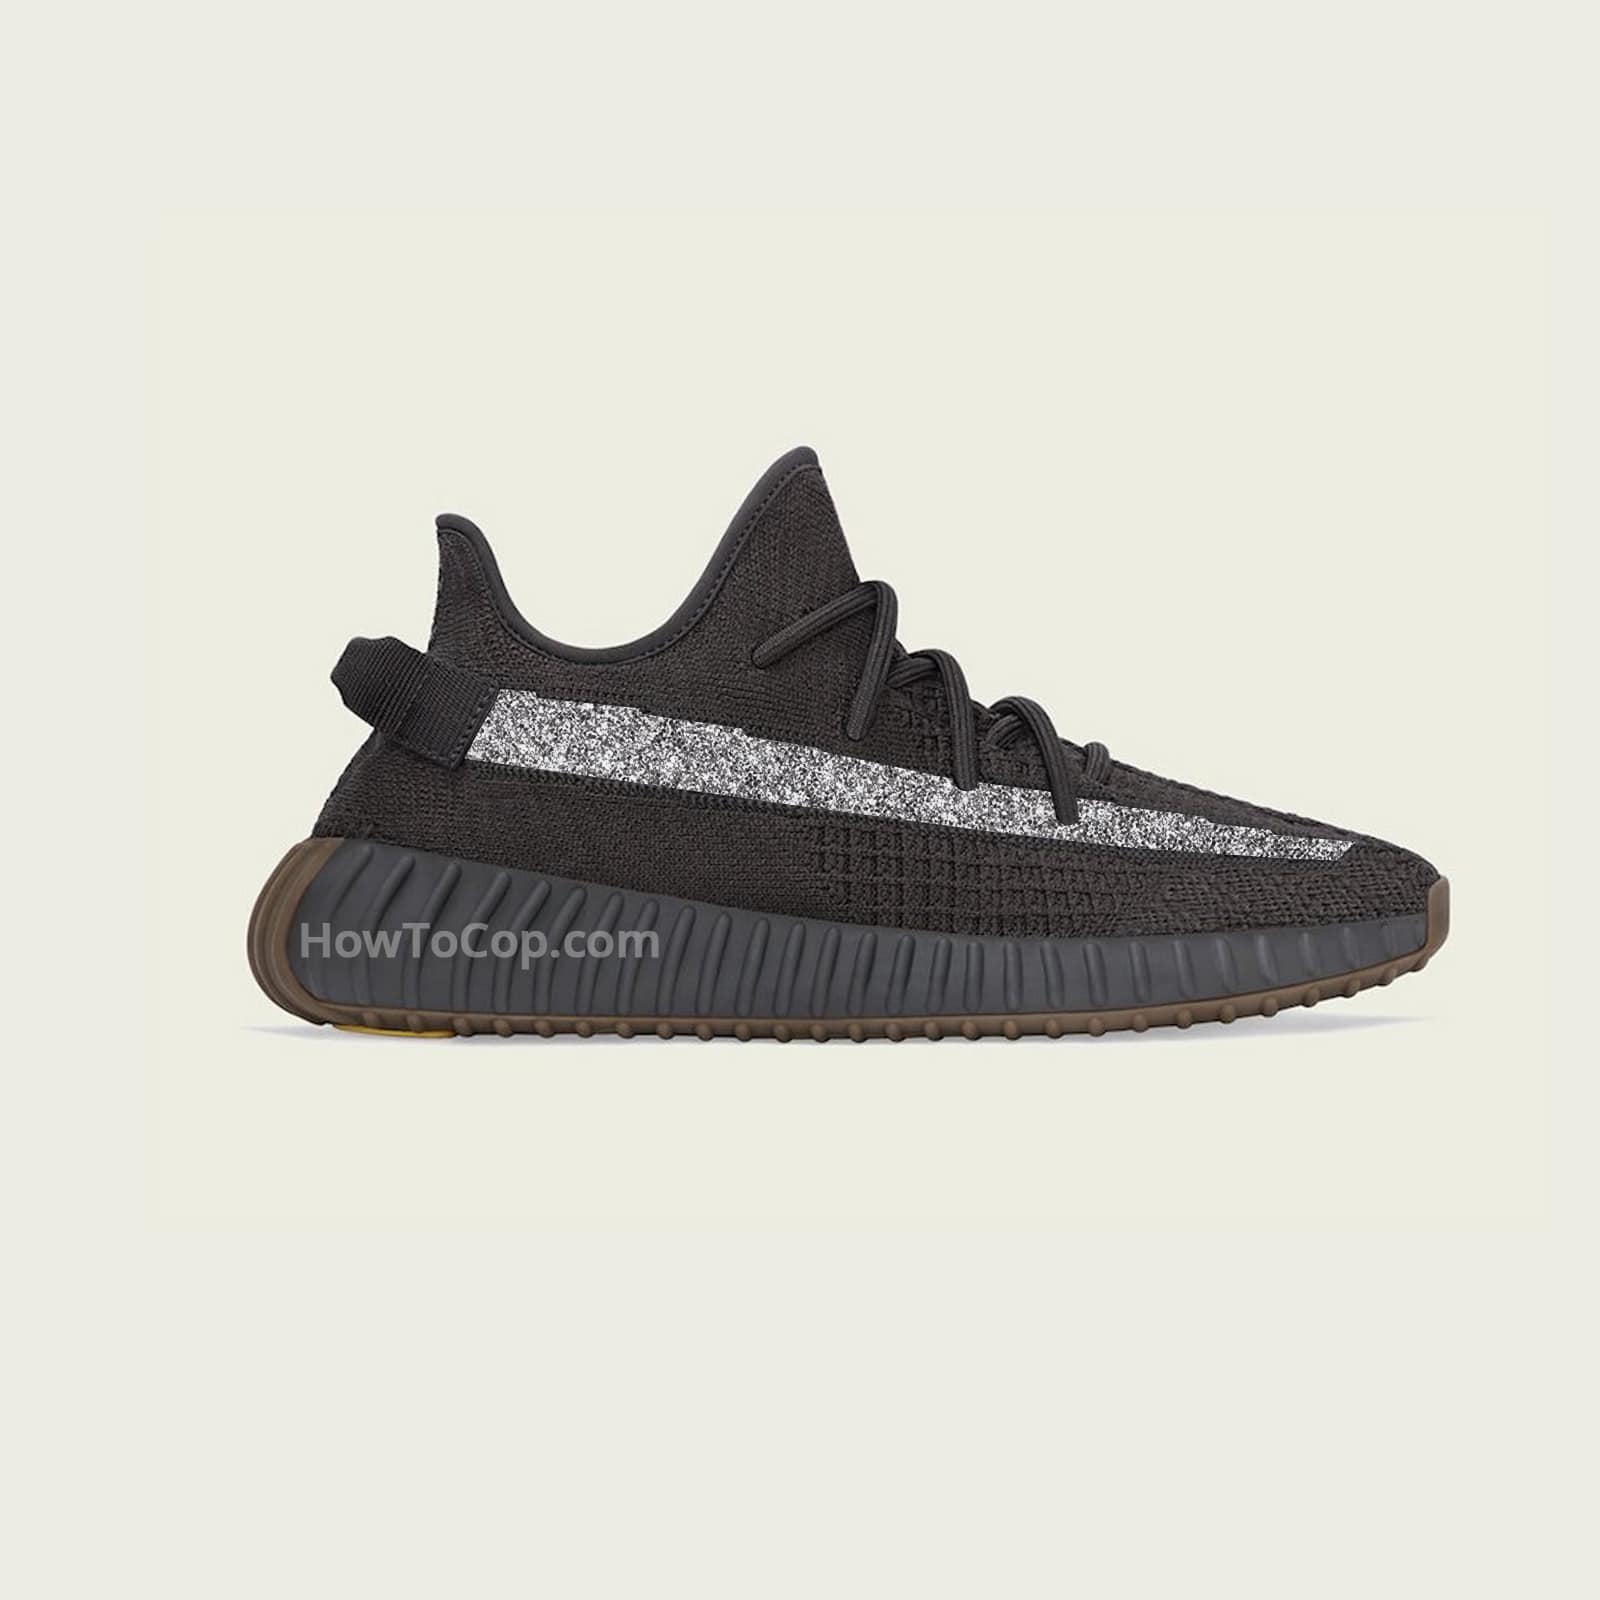 How To Cop adidas Yeezy Boost 350 V2 Cinder Reflective Release Links